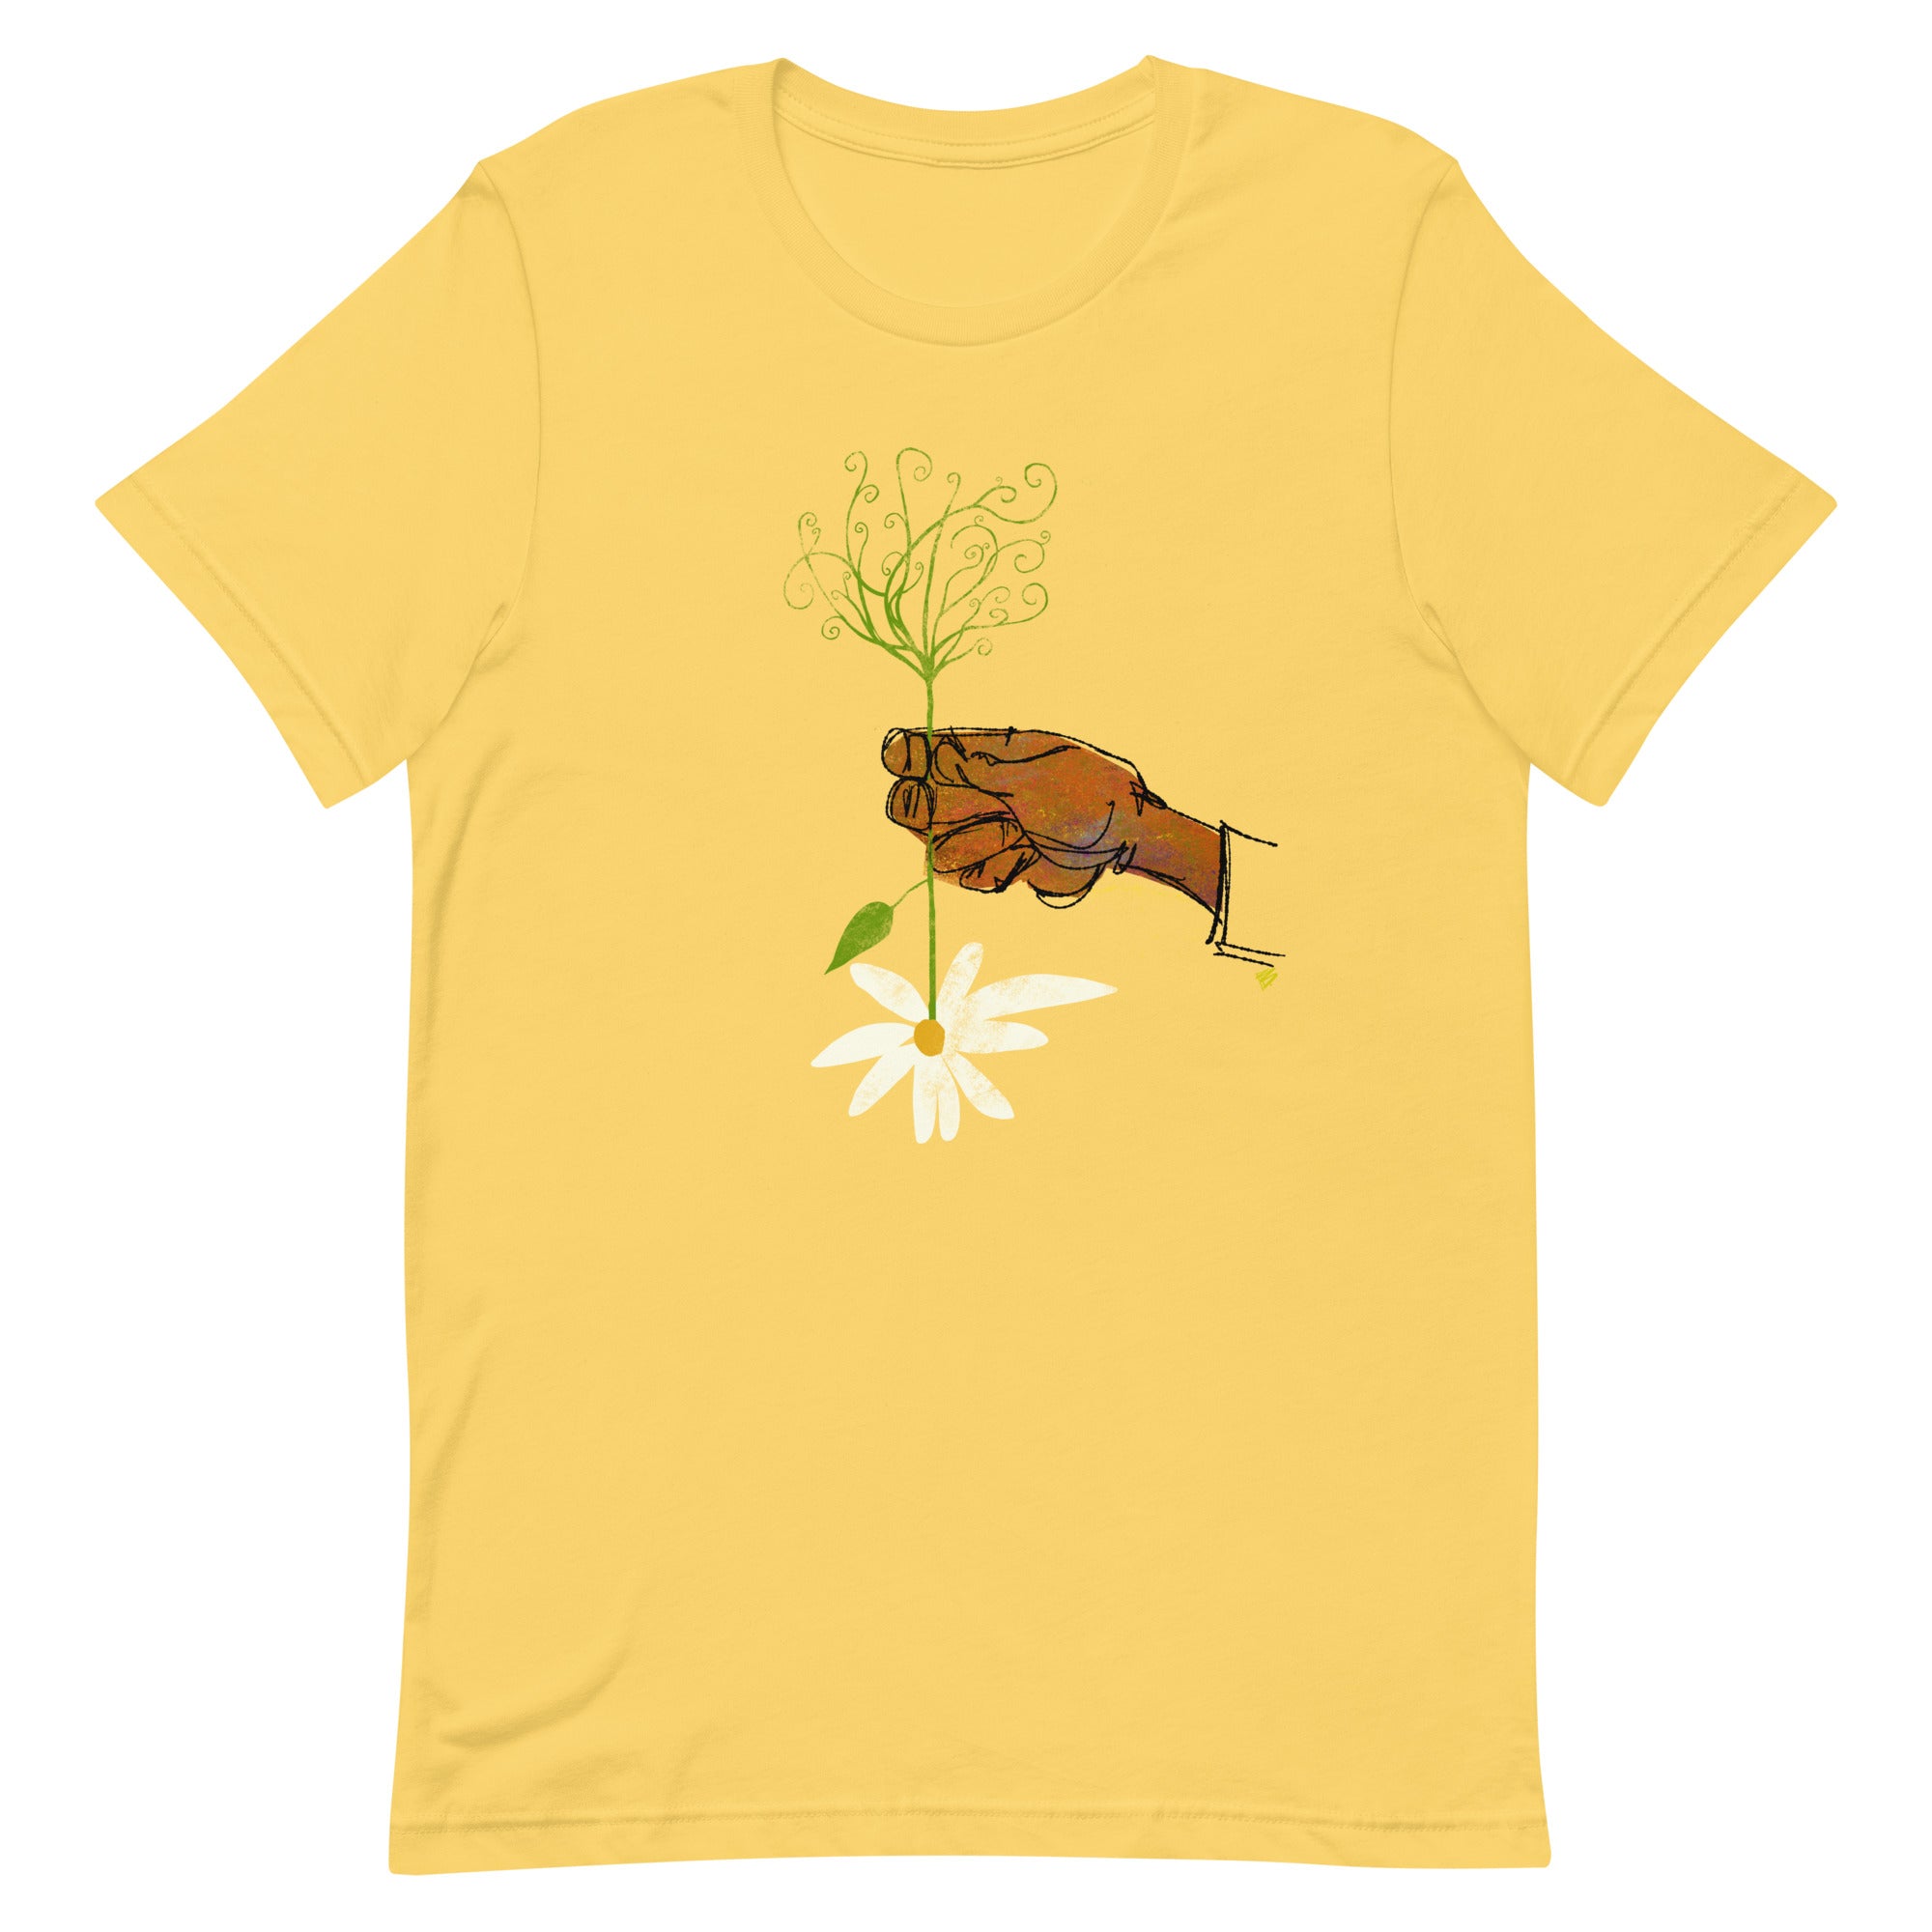 ROOTS UP  by pierre bennu t-shirt